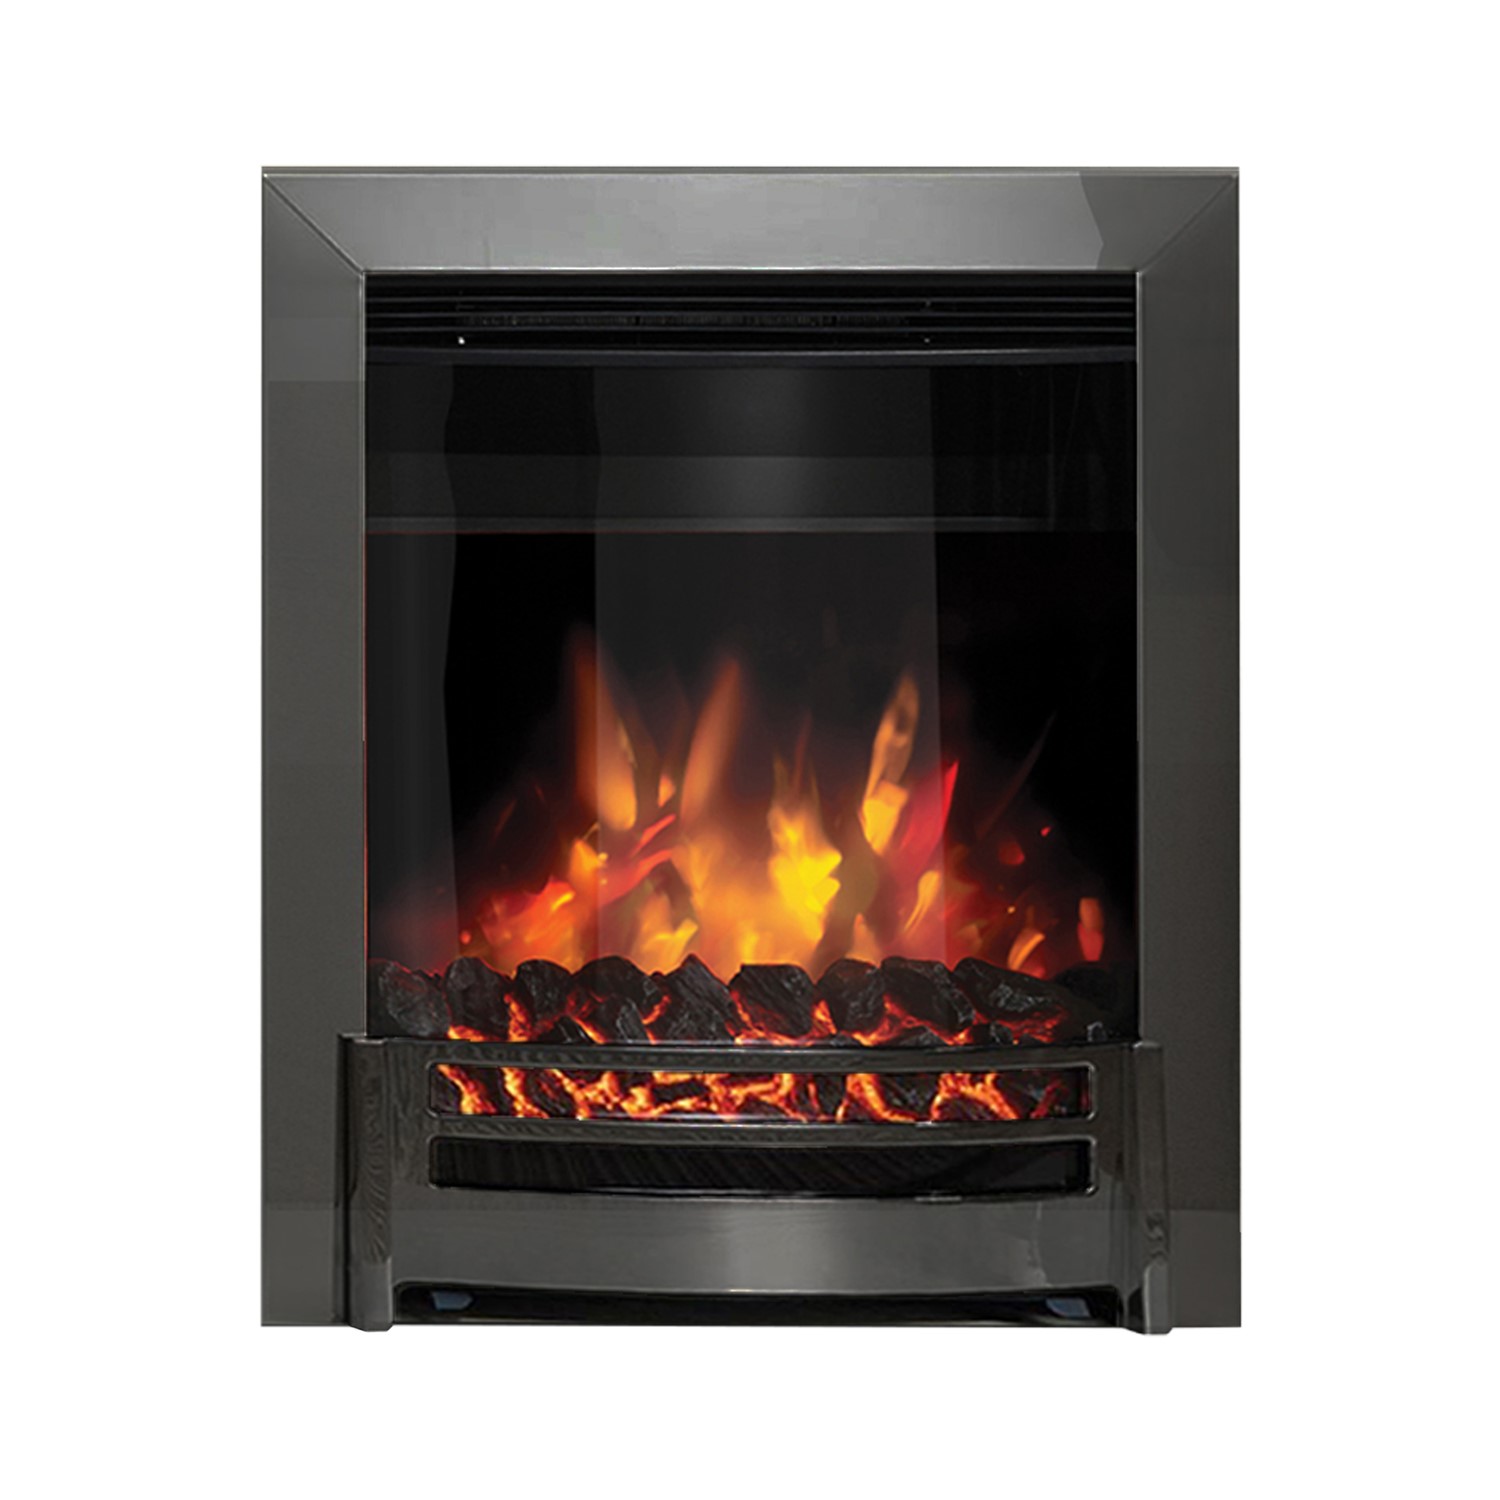 Read more about Be modern 16 black nickel inset electric fireplace ember